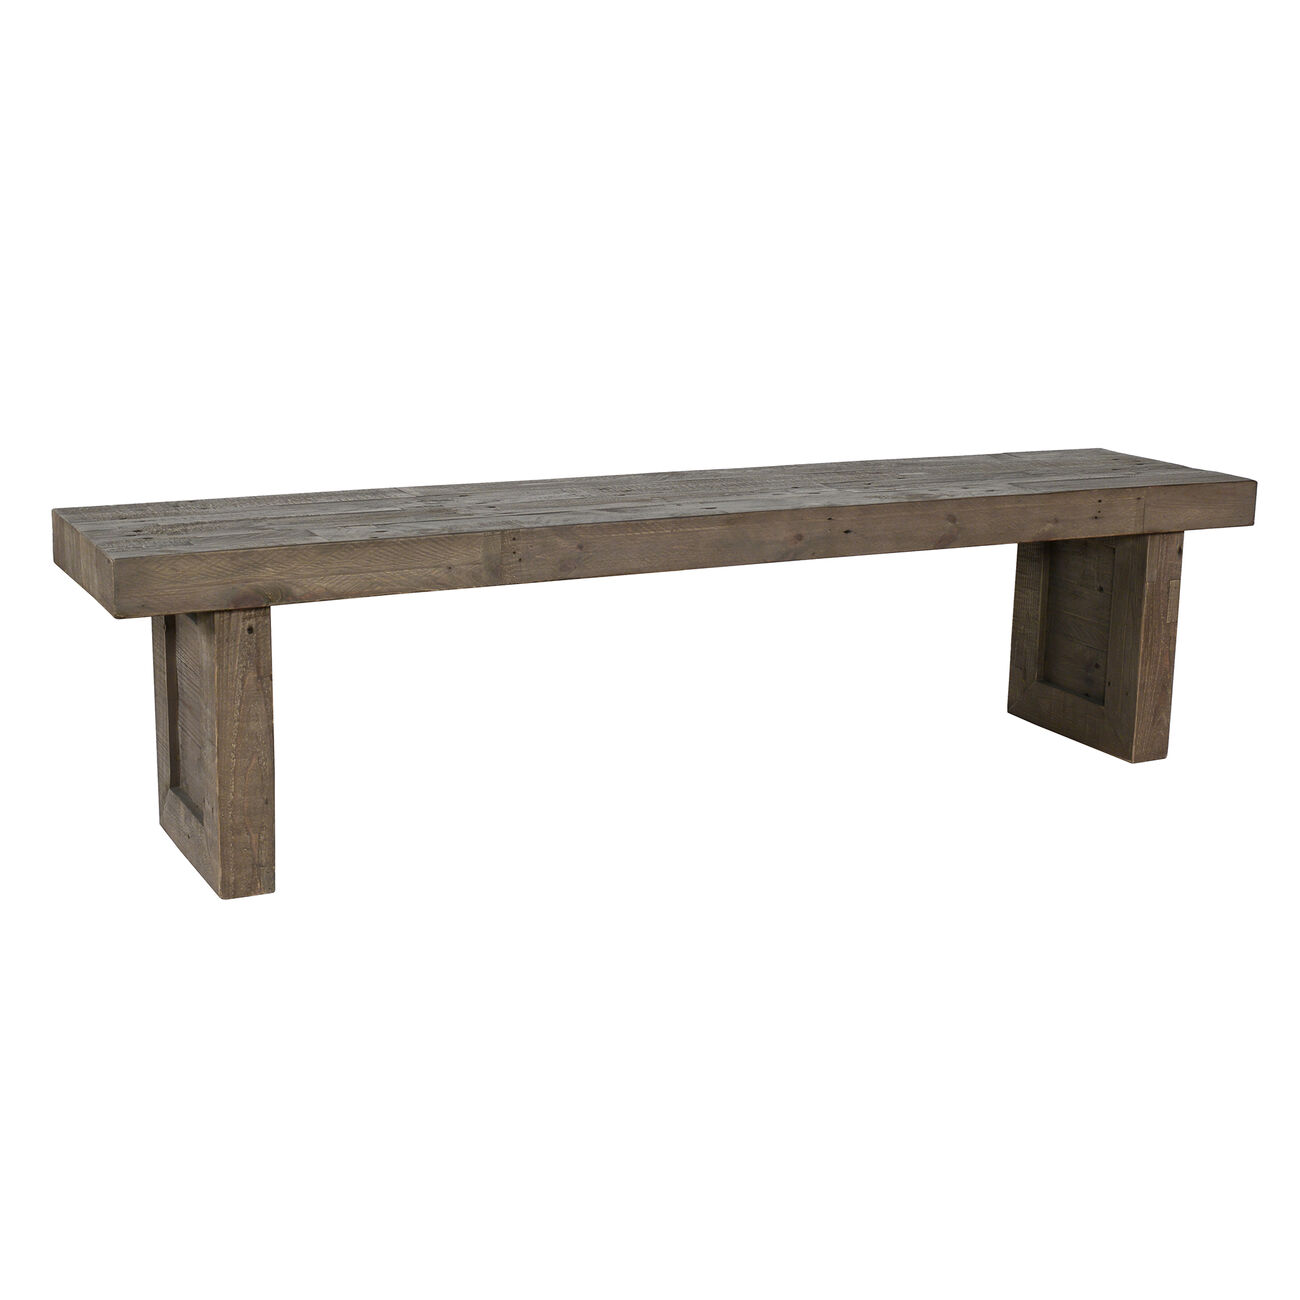 71 Inch Plank Style Wooden Bench, Rustic Brown